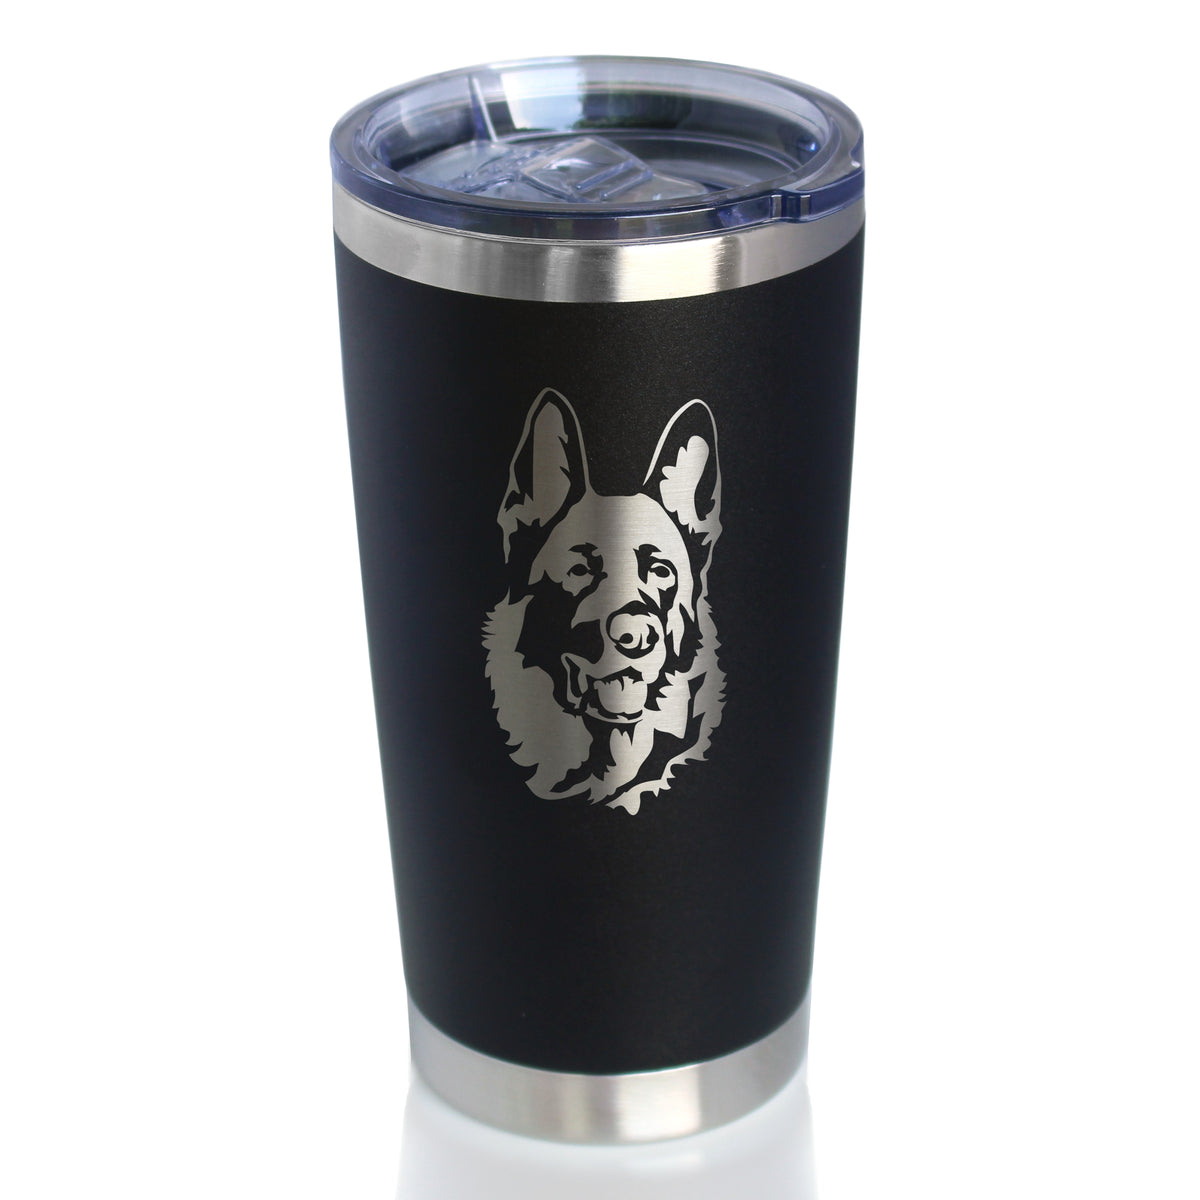 German Shepherd Happy Face - Insulated Coffee Tumbler Cup with Sliding Lid - Stainless Steel Insulated Mug - Fun Unique German Shepherd Themed Décor and Gifts for Men &amp; Women